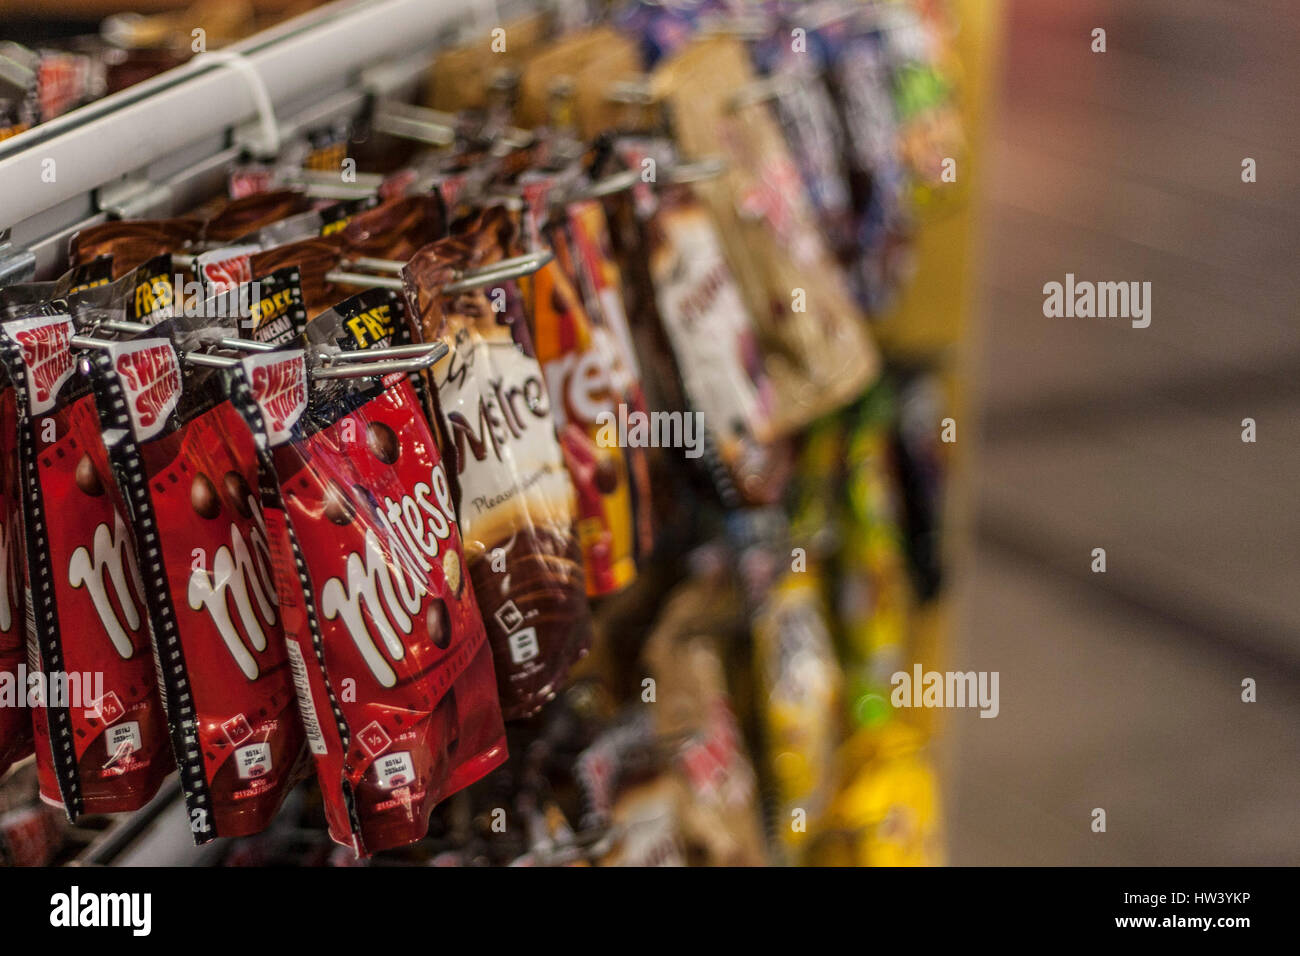 CARDIFF, UNITED KINGDOM. Bags of sweets and chocolates are sold as a cinema snack at Cineworld. Stock Photo